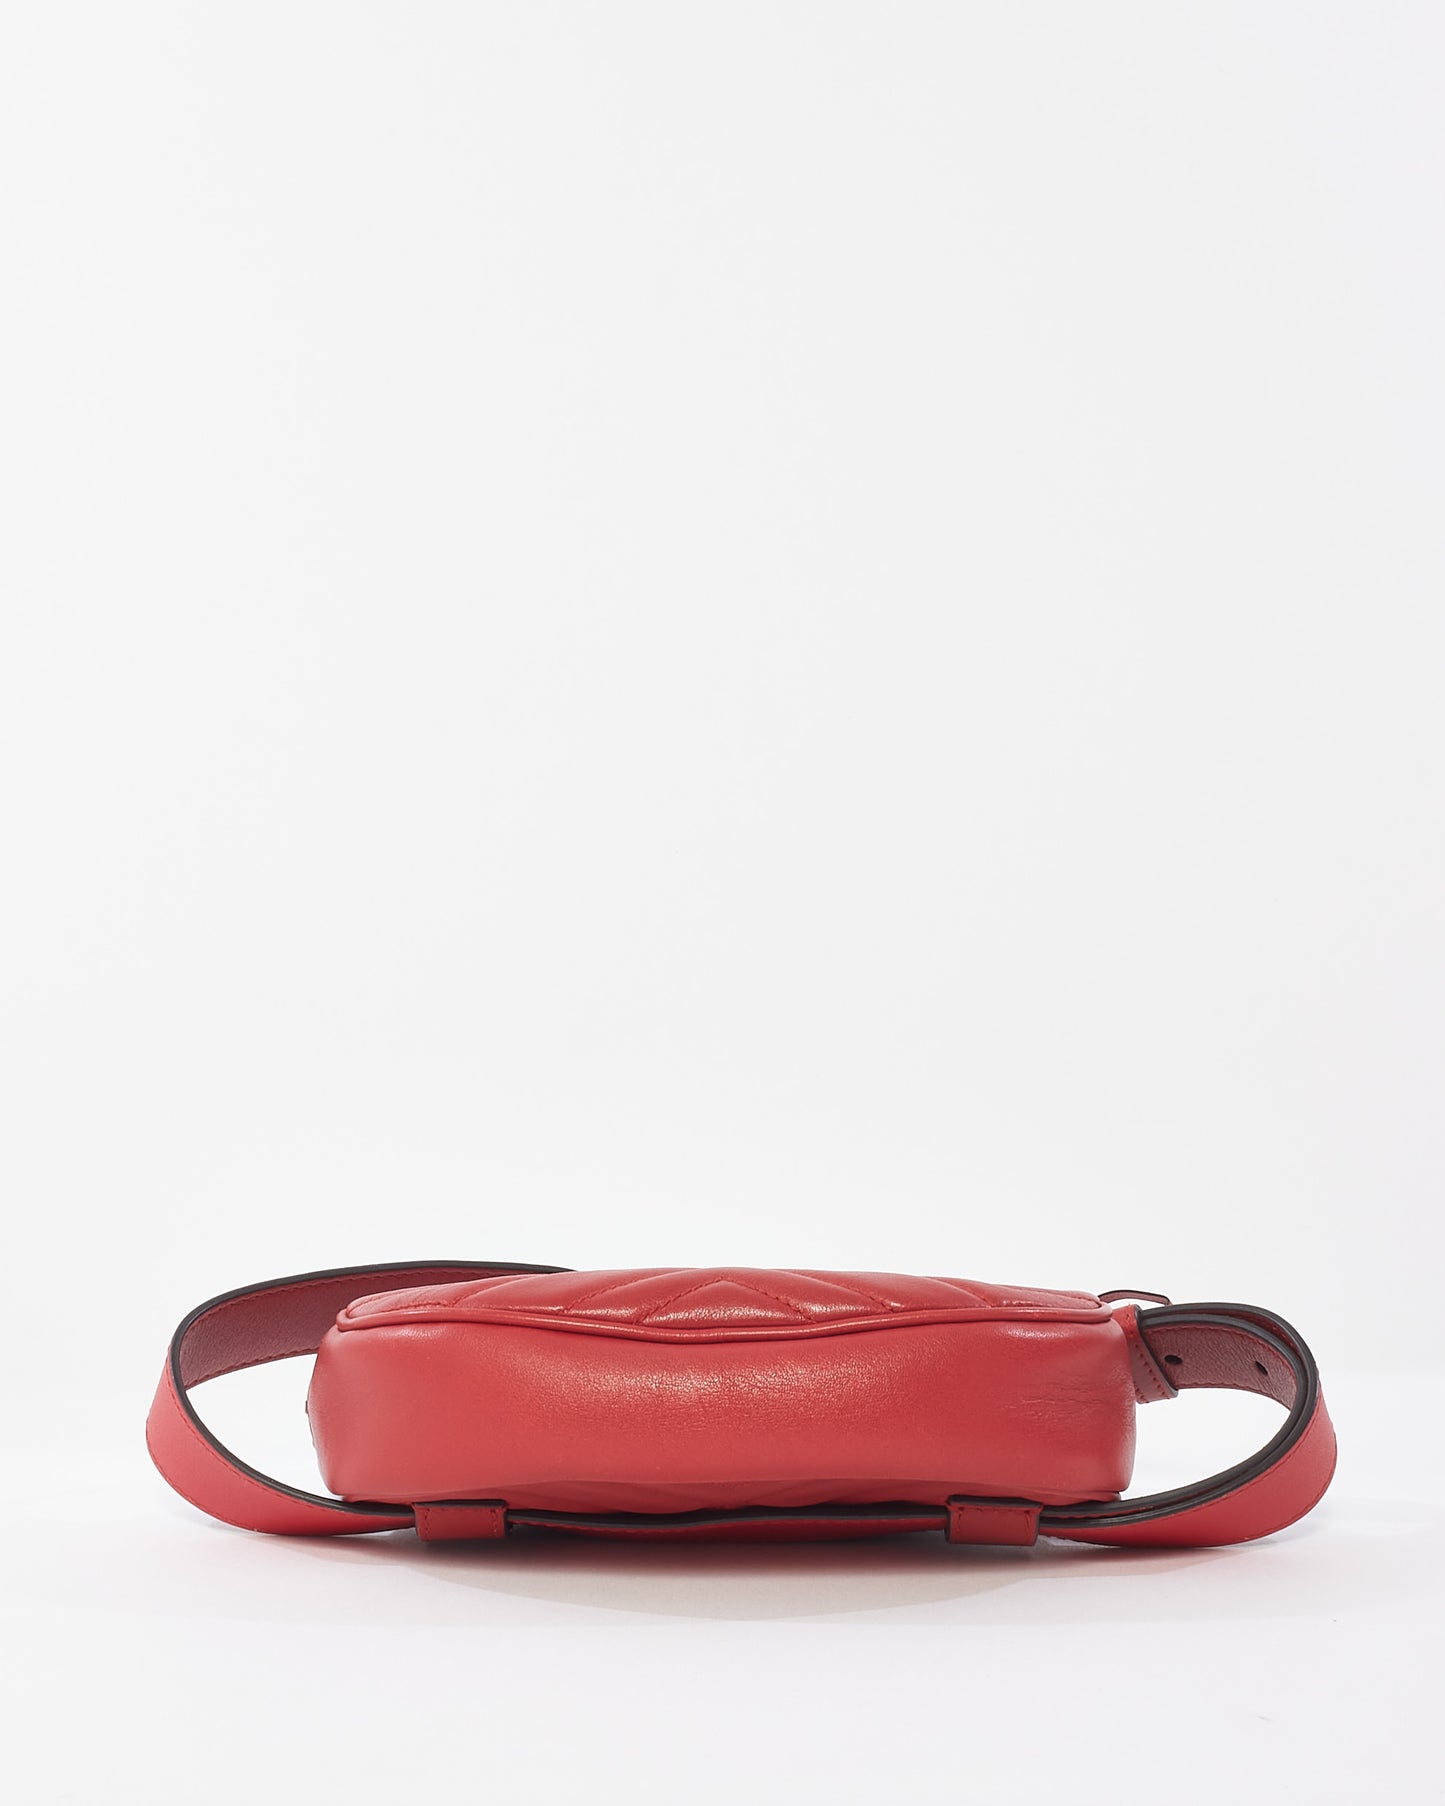 Gucci Red Leather GG Marmont Belt Bag - 75/30